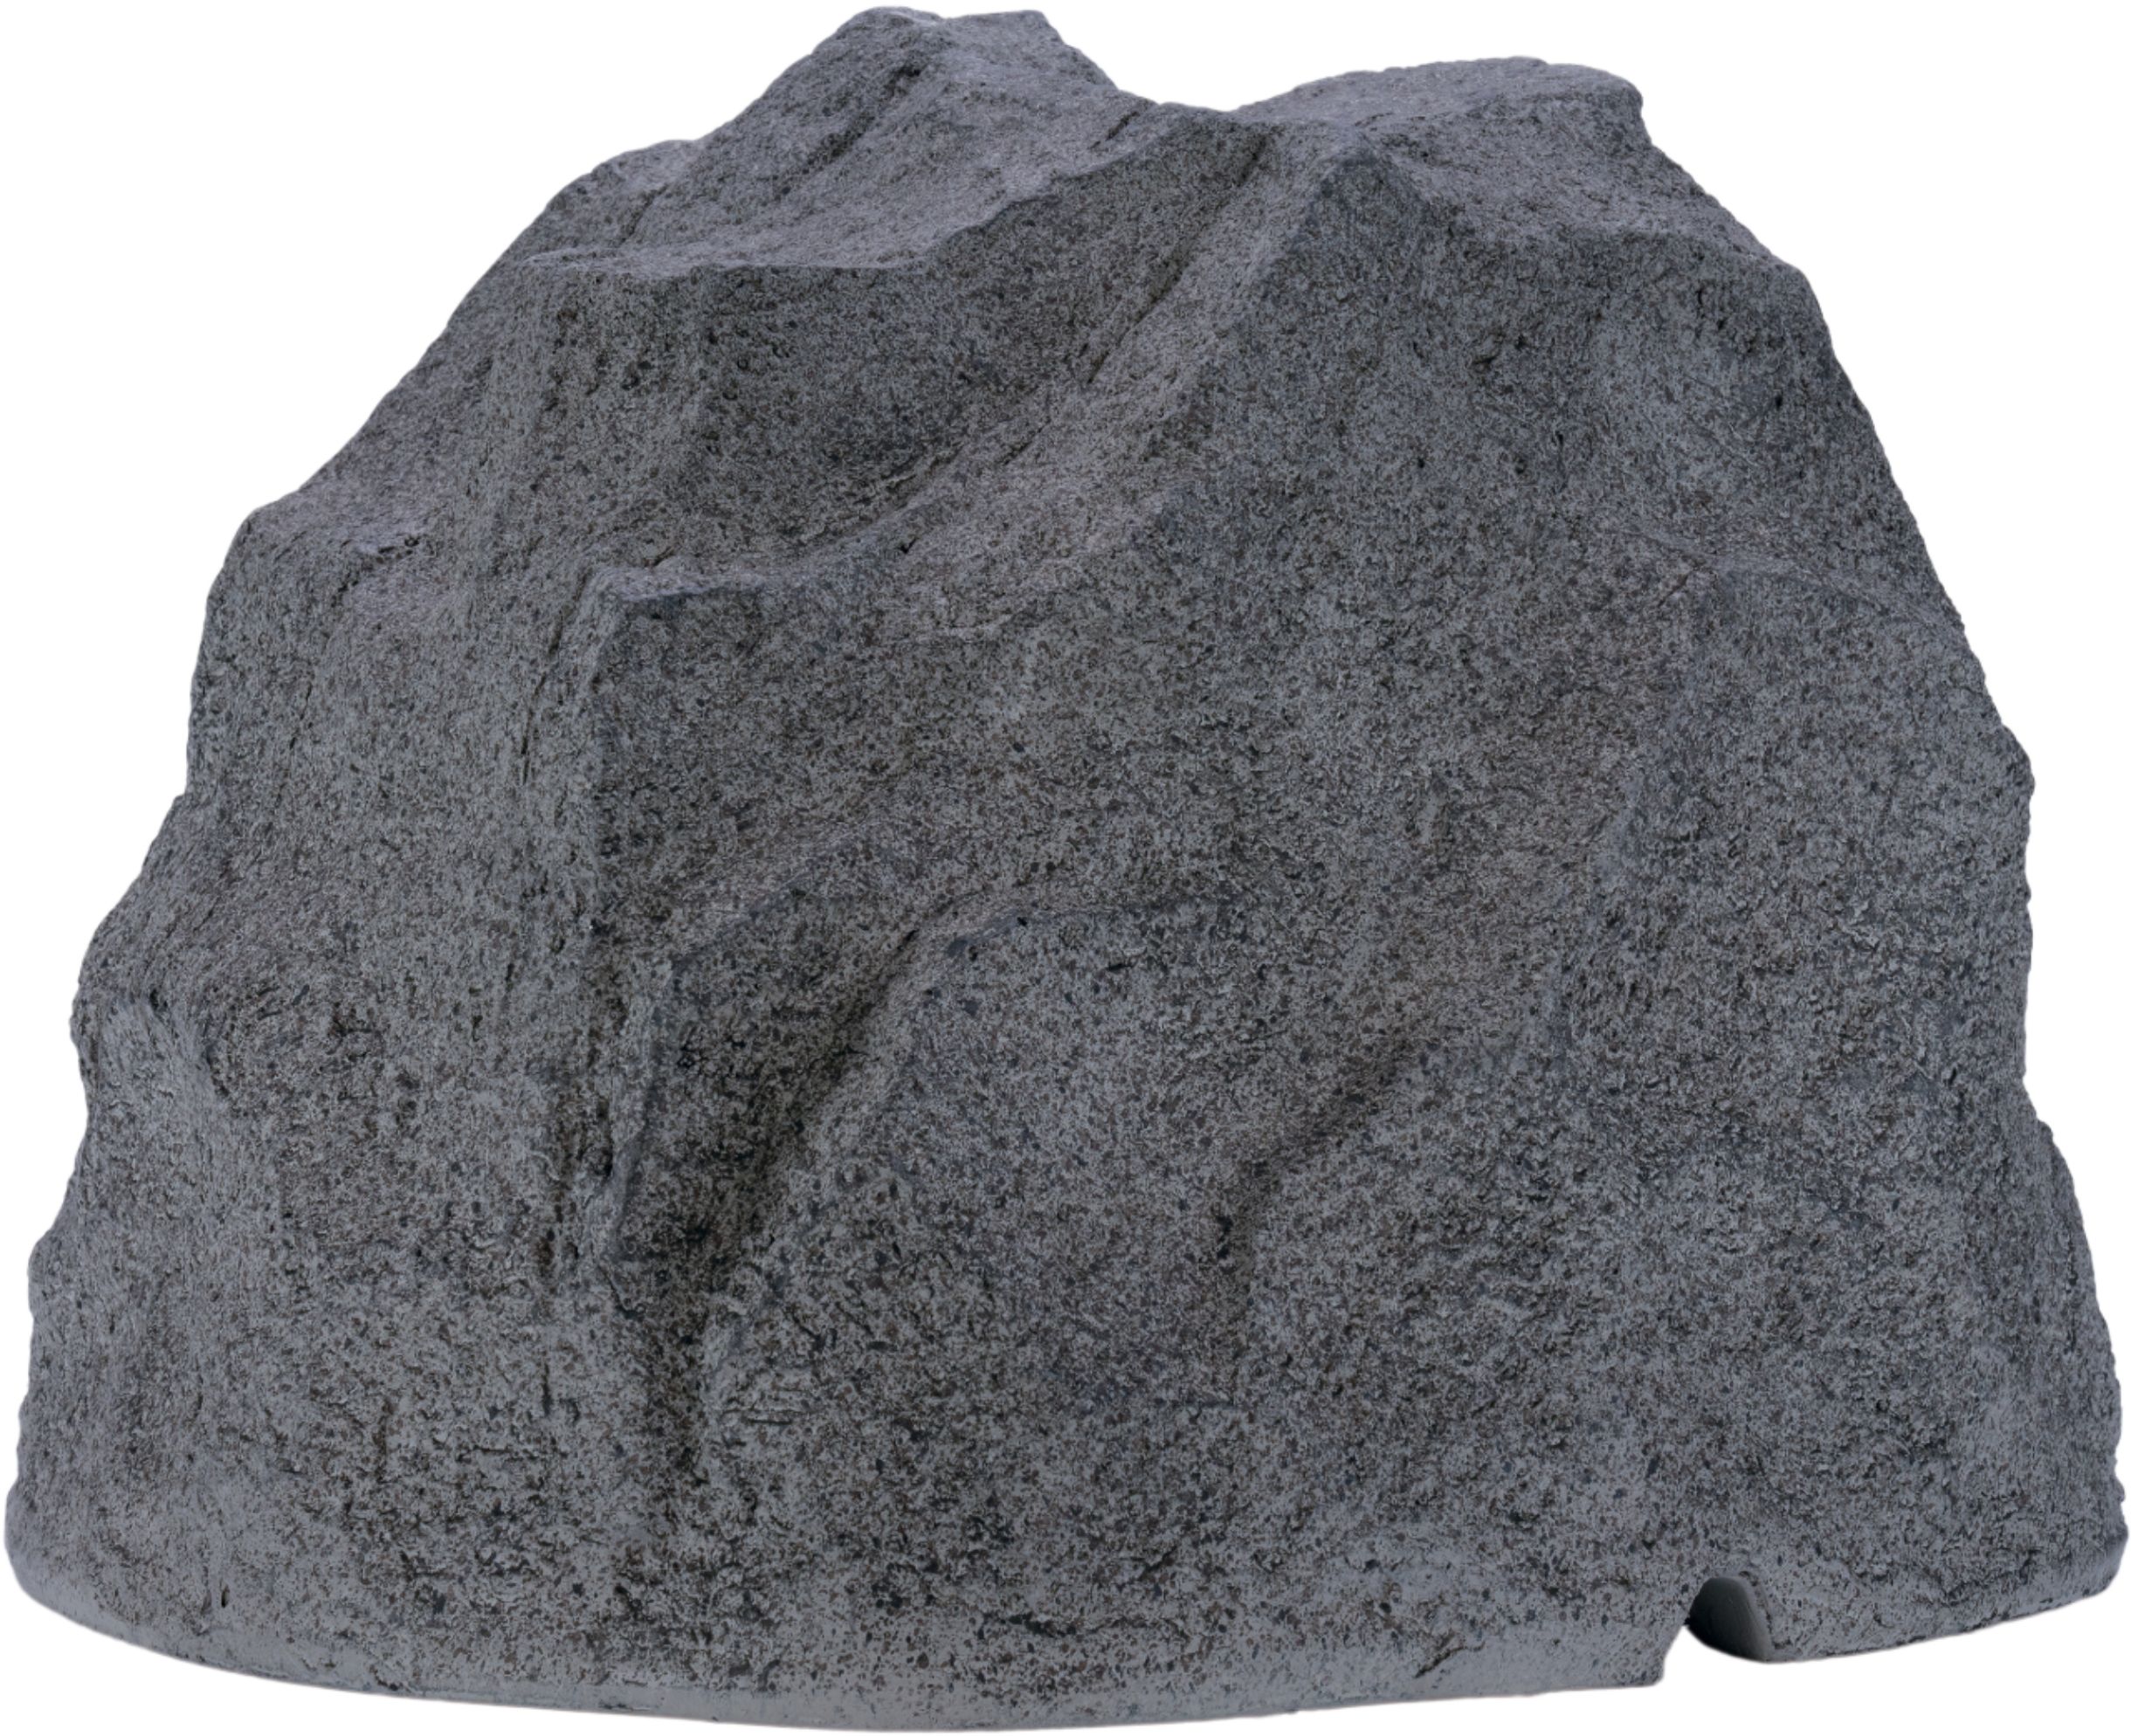 Back View: Sonance - MAGROCKS2.1 - Mag Series 2.1-Ch. Outdoor Rock Speaker System (Each) - Charcoal Gray Granite